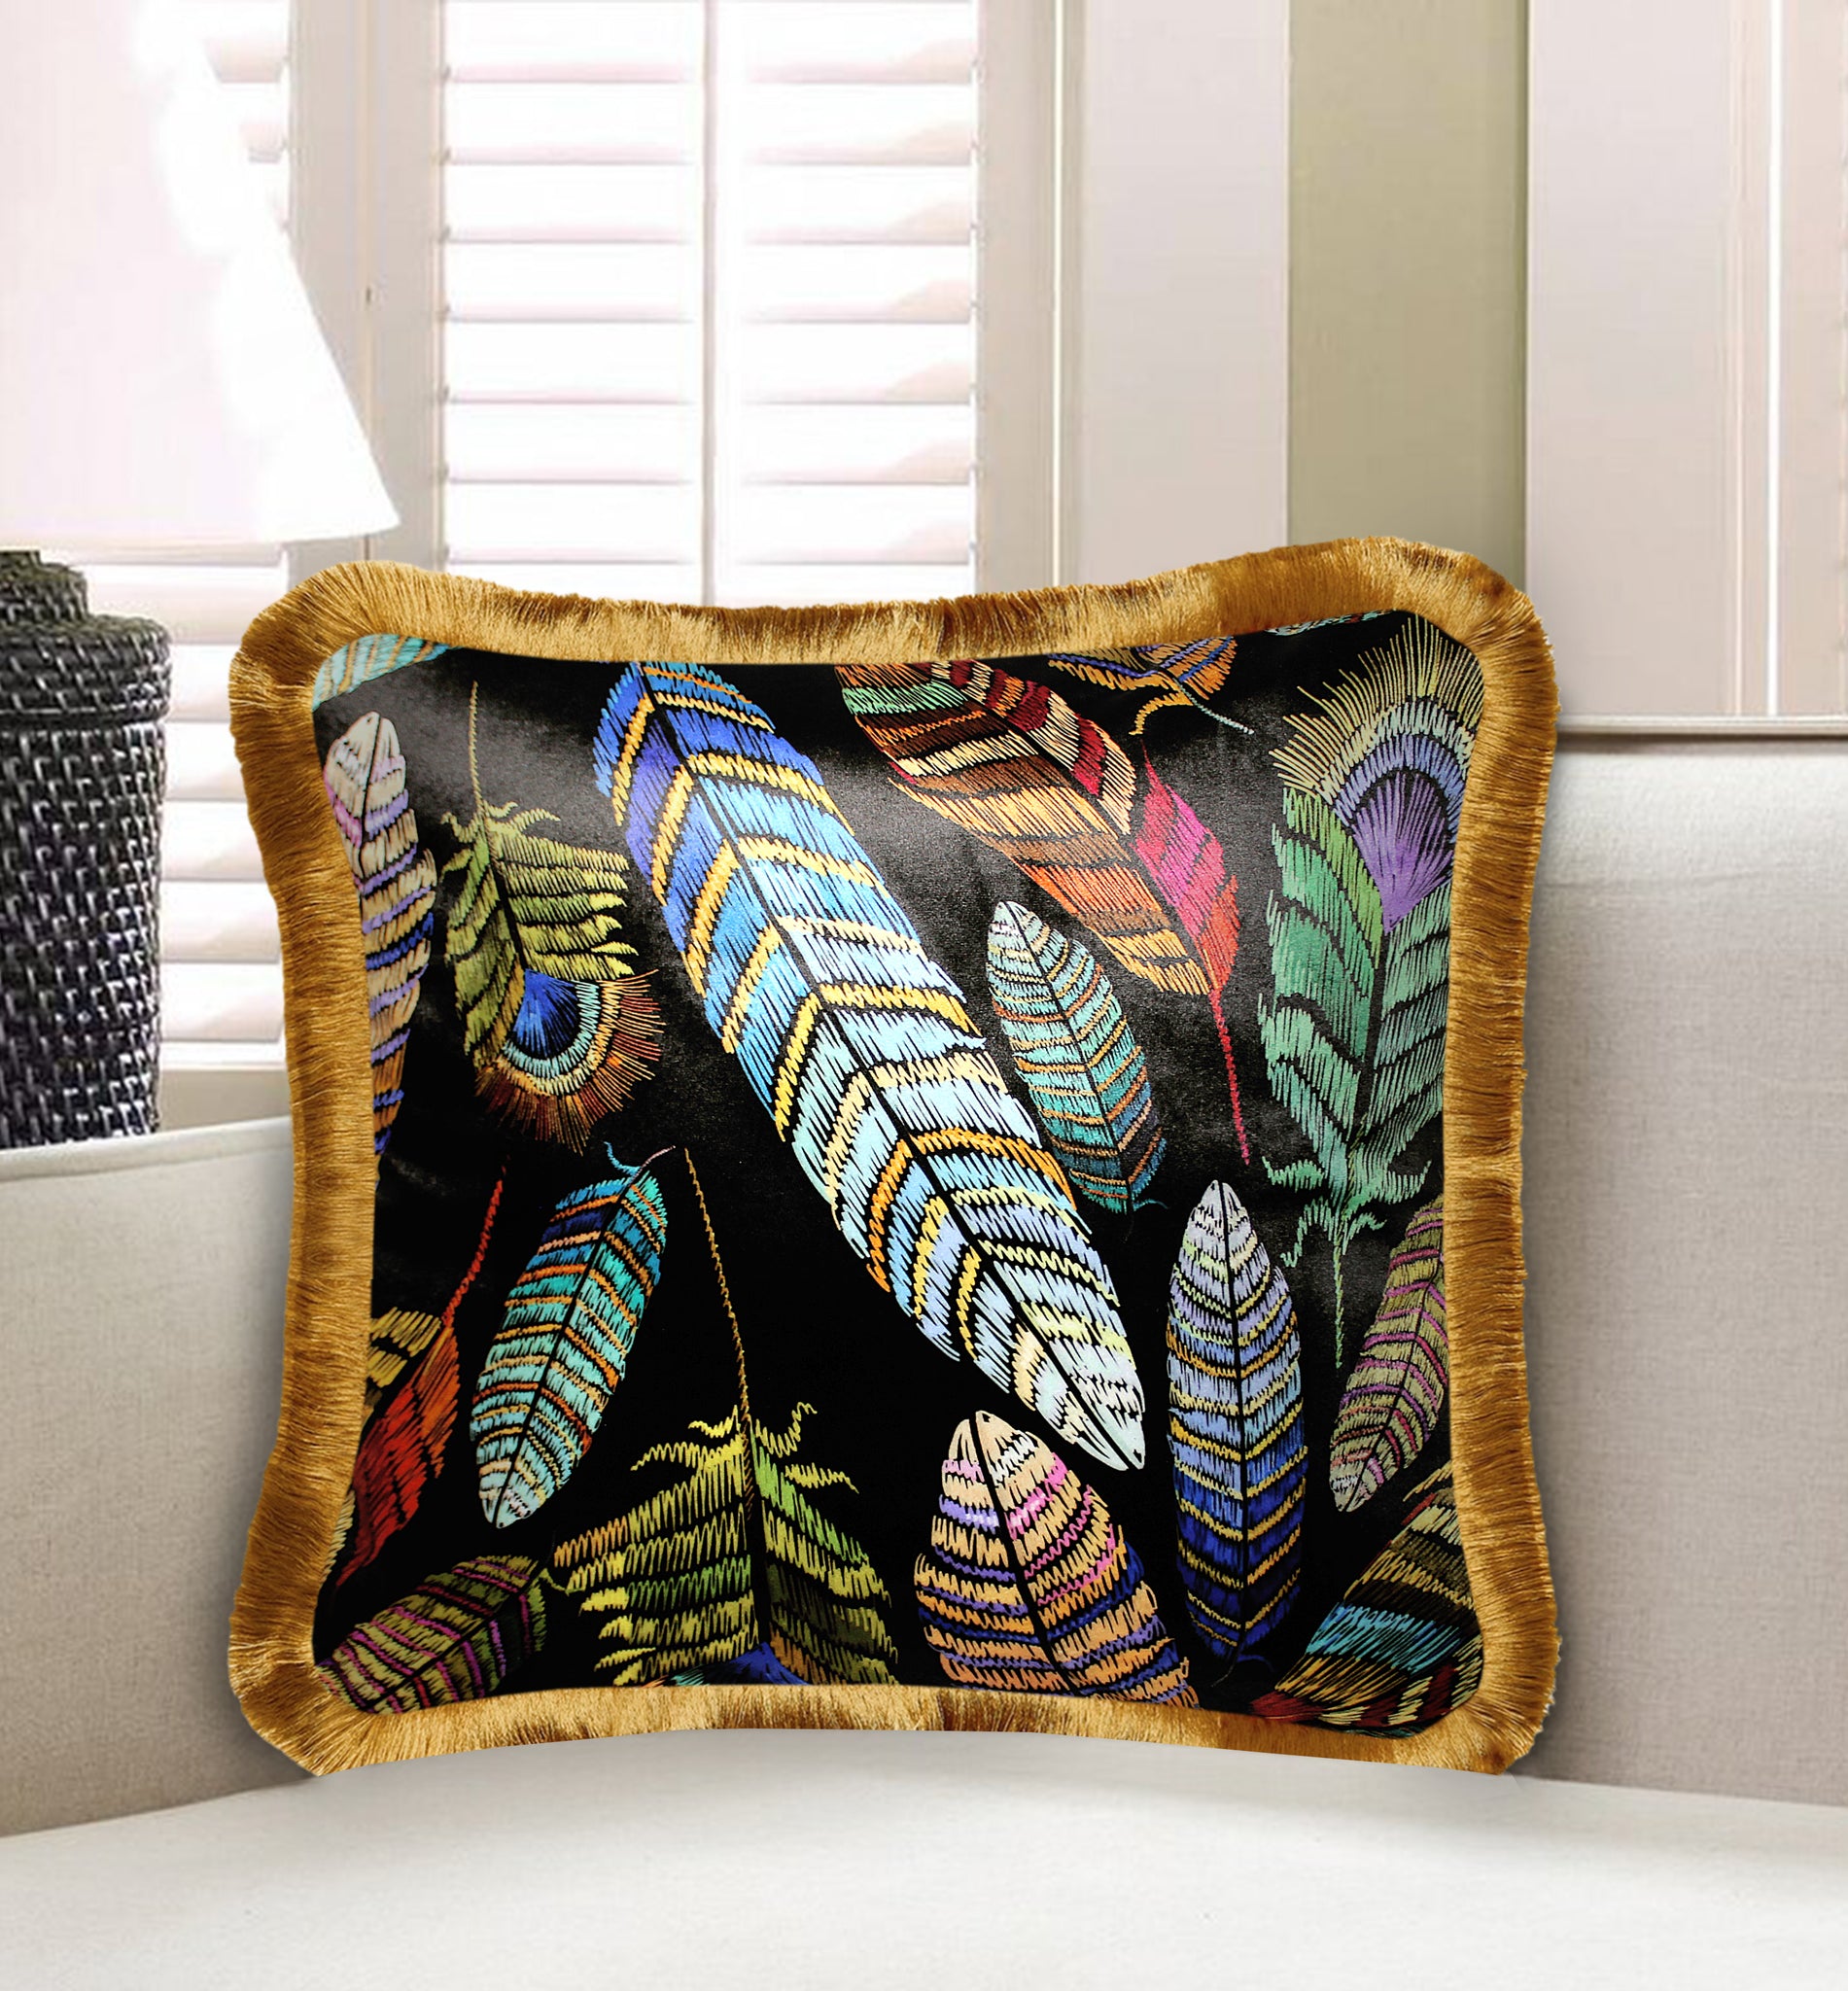 Black Velvet Cushion Cover Colorful Feather Decorative Pillowcase Home Decor Throw Pillow for Sofa Chair Living Room 45x45 cm 18x18 In